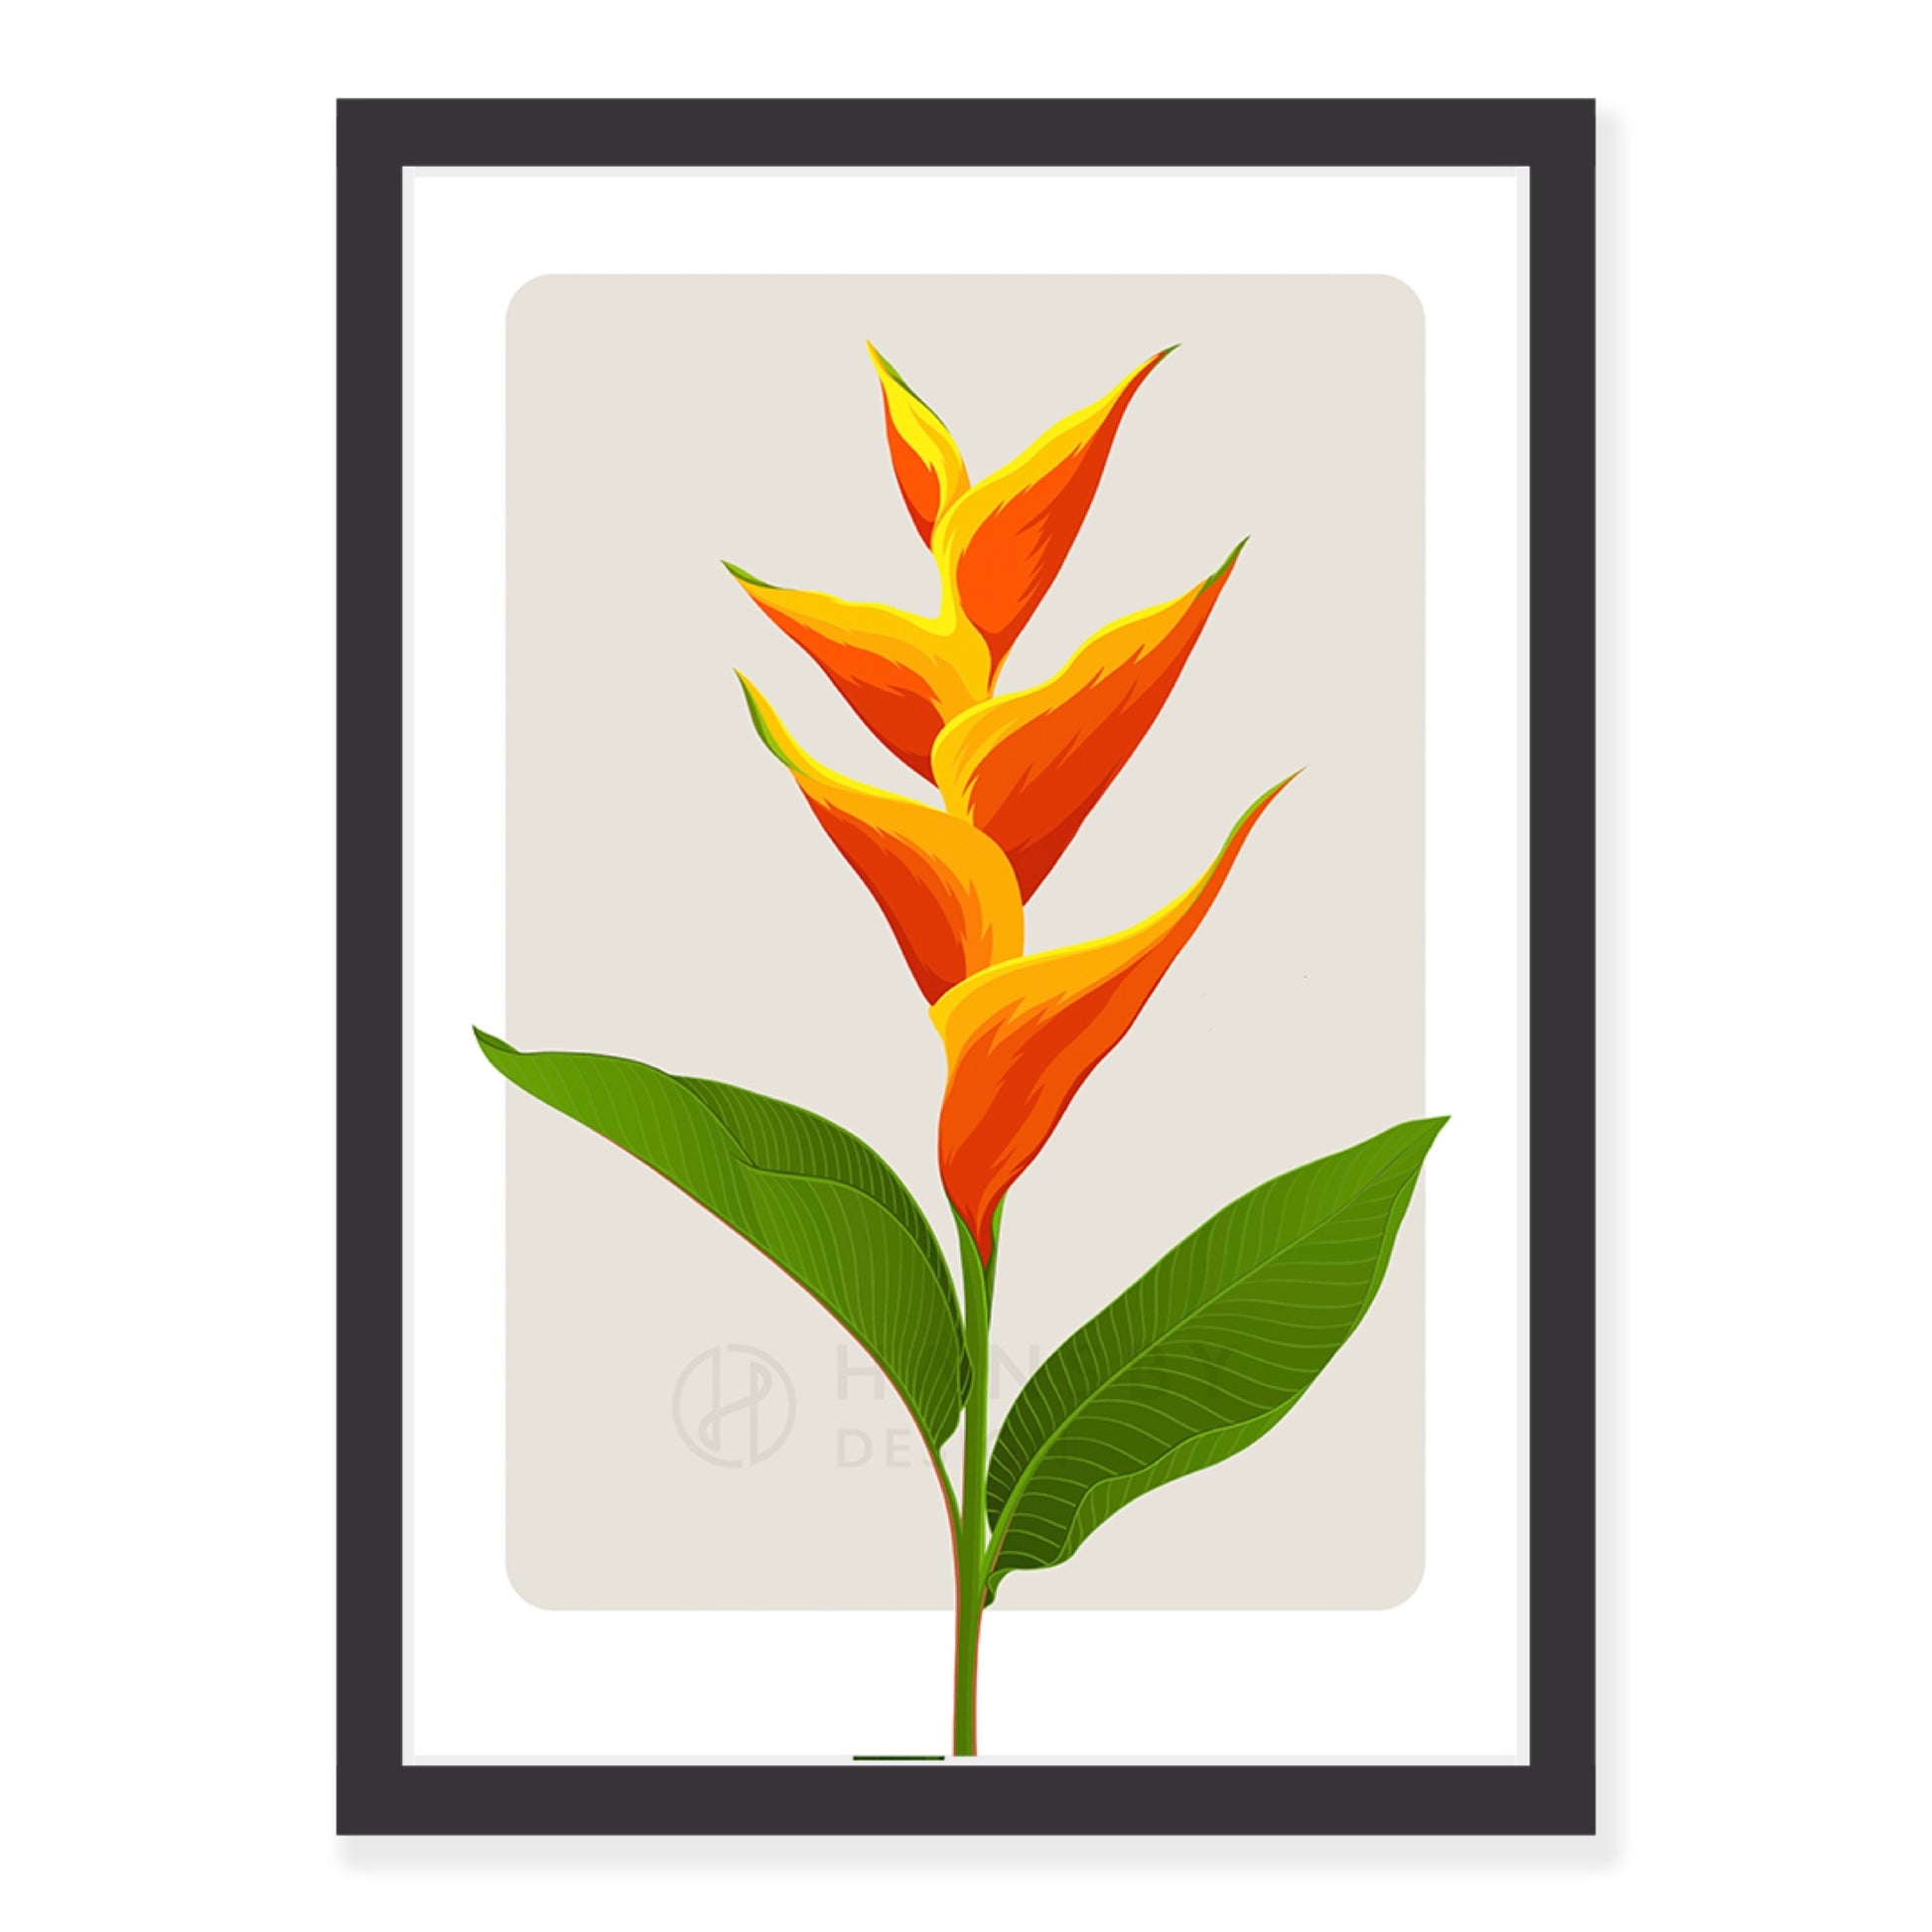 Heliconia art print in black frame, by NZ artist Hansby Design